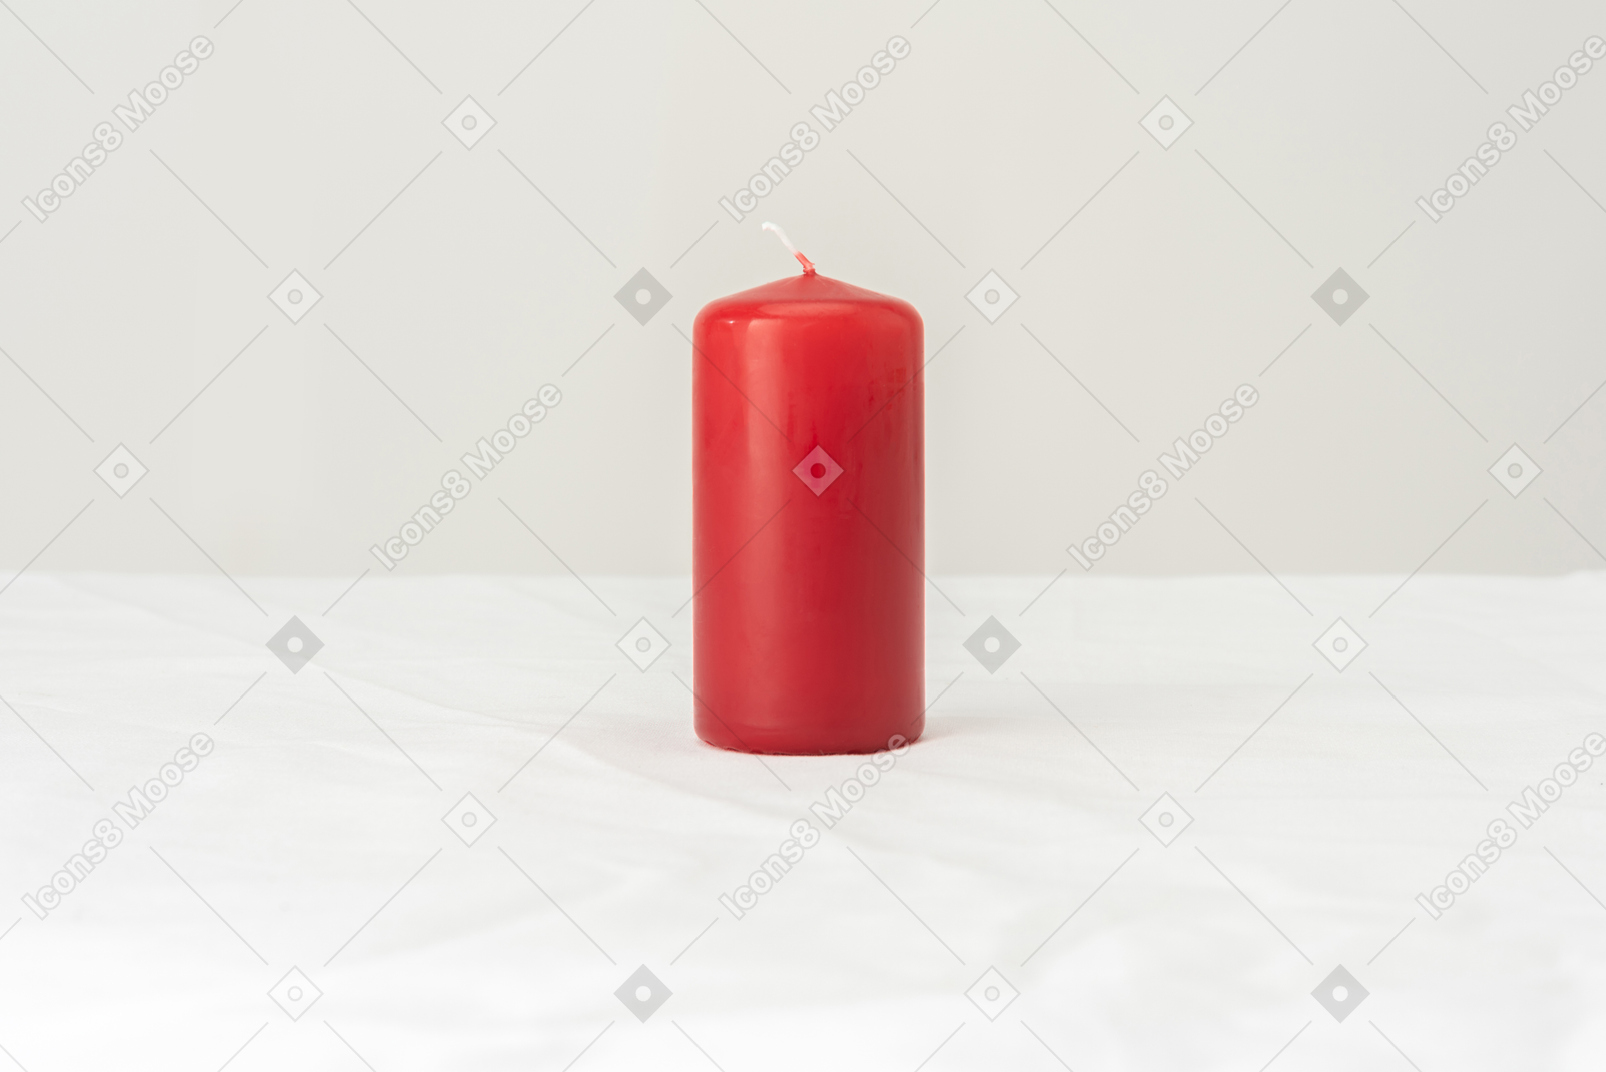 Candles give a cozy feeling to any house